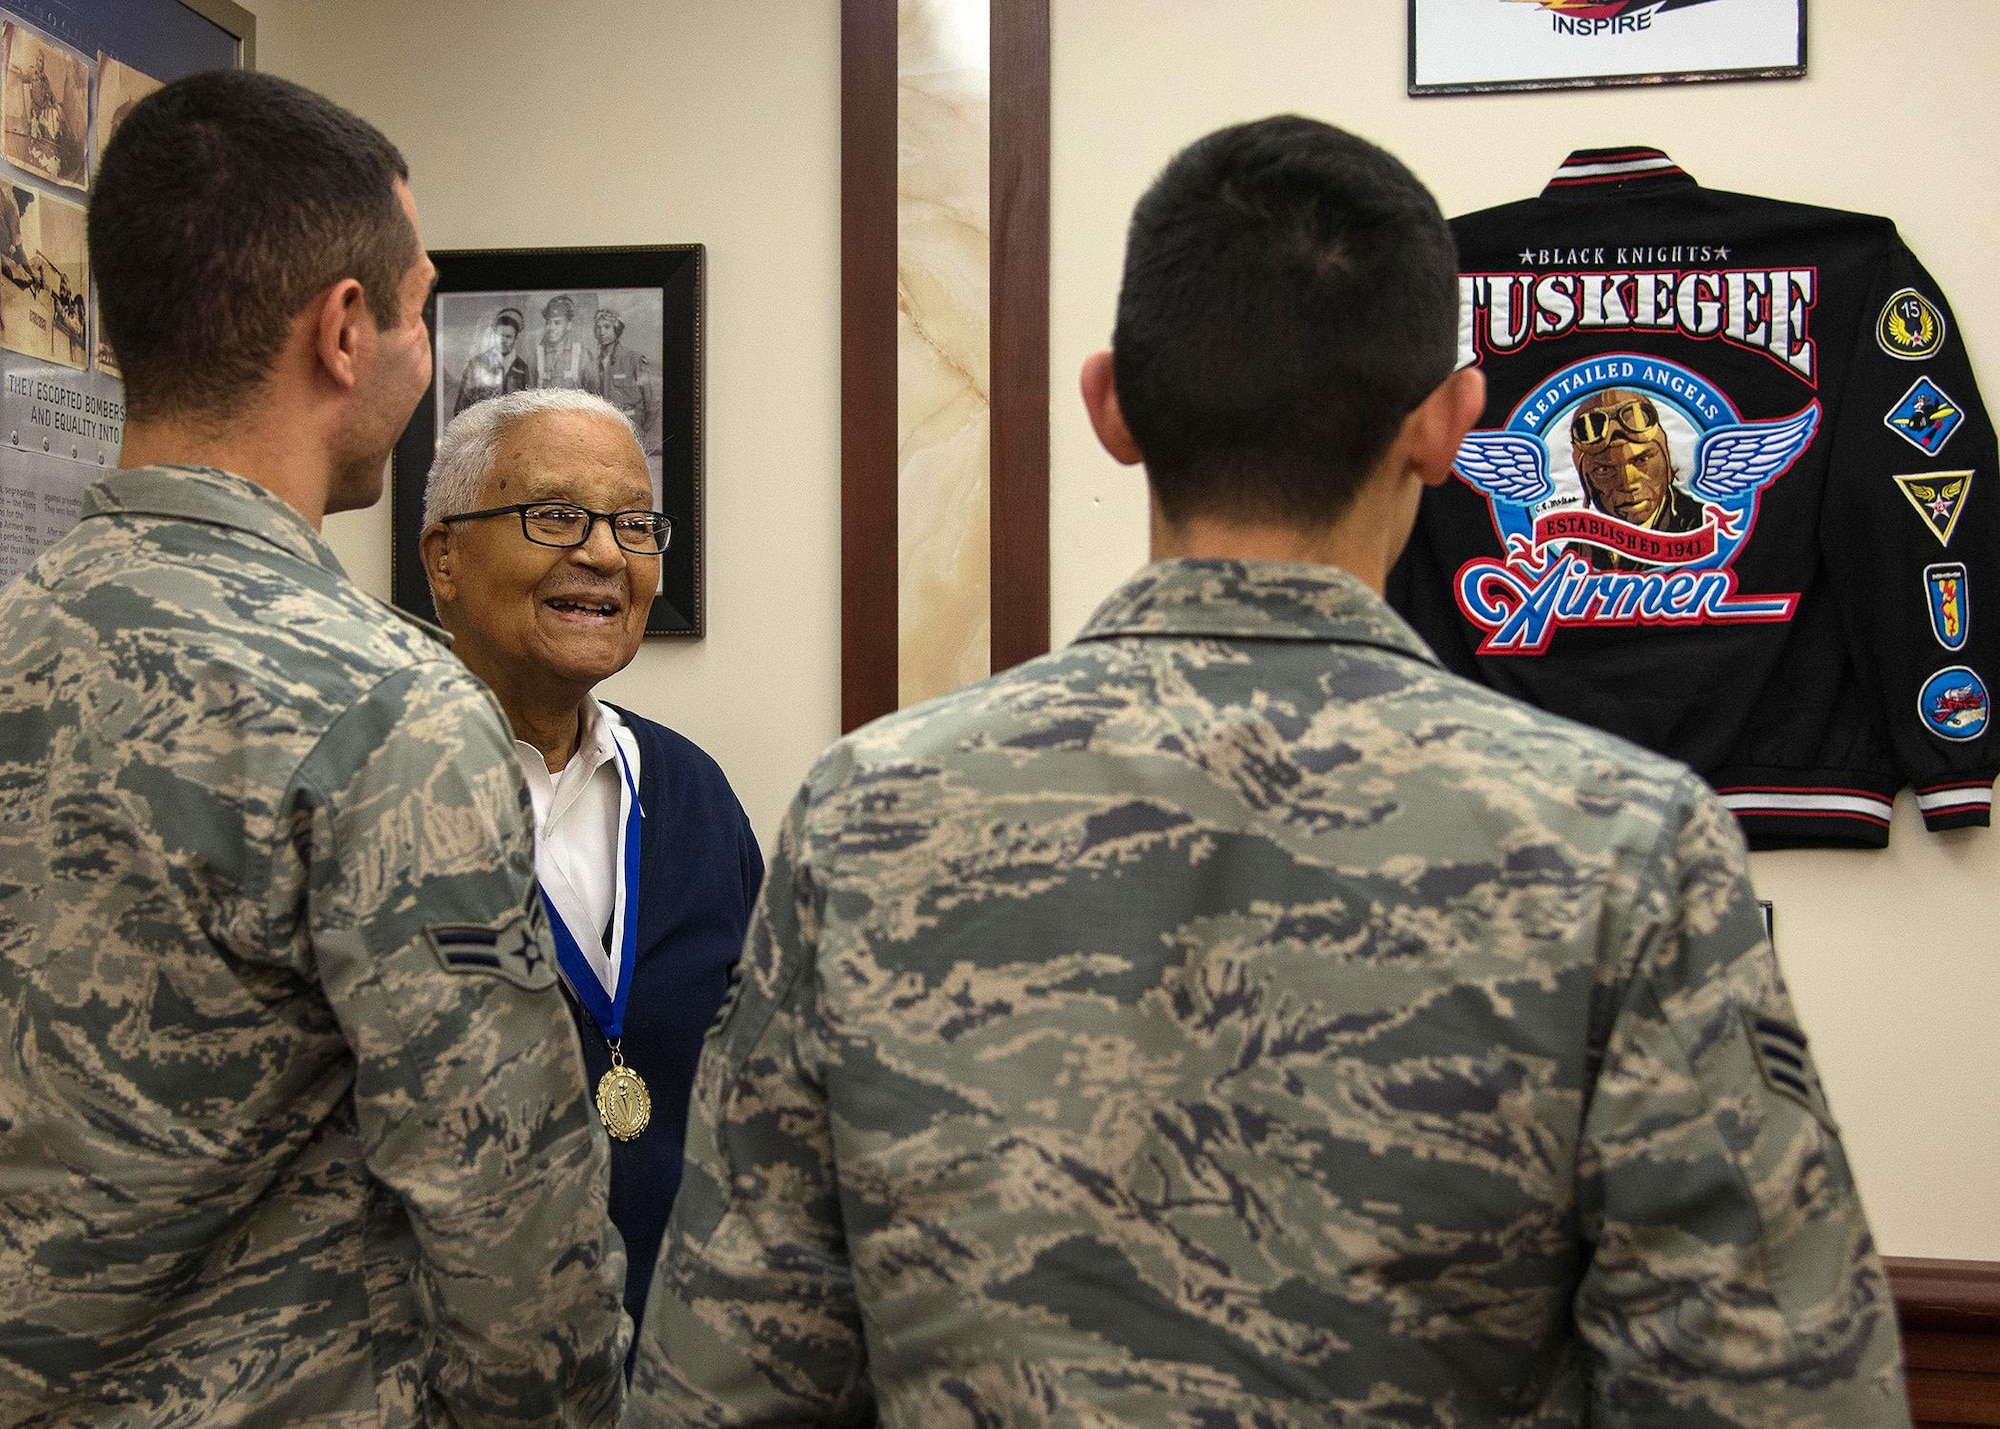 Retired Col. Charles E. McGee, an original Tuskegee Airman, speaks with Airmen during a visit to Hanscom Air Force Base, Mass., Oct. 27. Senior Airman Alfredo Maldonado, right, and Airman 1st Class Quinton Coke, both personnelist with the 66th Force Support Squadron, and other Airmen from Hanscom, met with McGee who spoke about lessons learned, Air Force history and challenged each Airmen to believe in themselves. (U.S. Air Force photo by Mark Herlihy)   